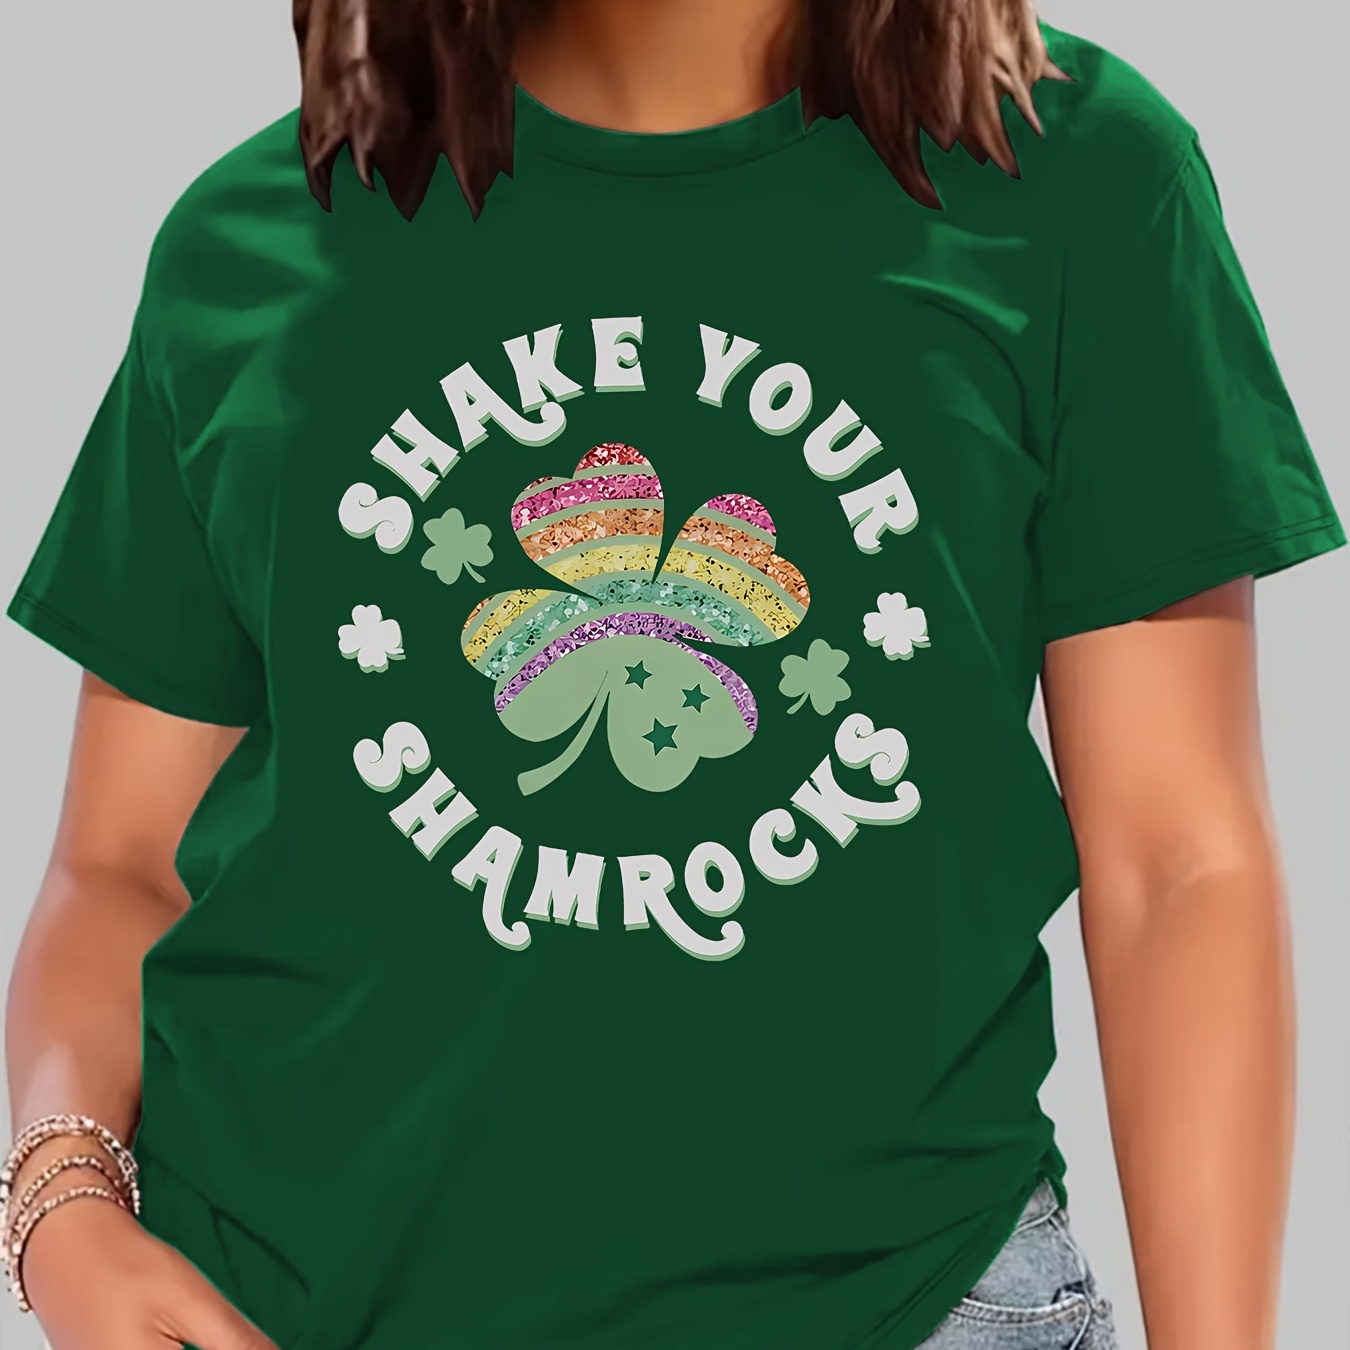 

Women's St. Patrick's Day Sports T-shirt Top, Plus Size Colorful Clover & Slogan Print Stretchy Round Neck Breathable Short Sleeve Fitness Tee Top